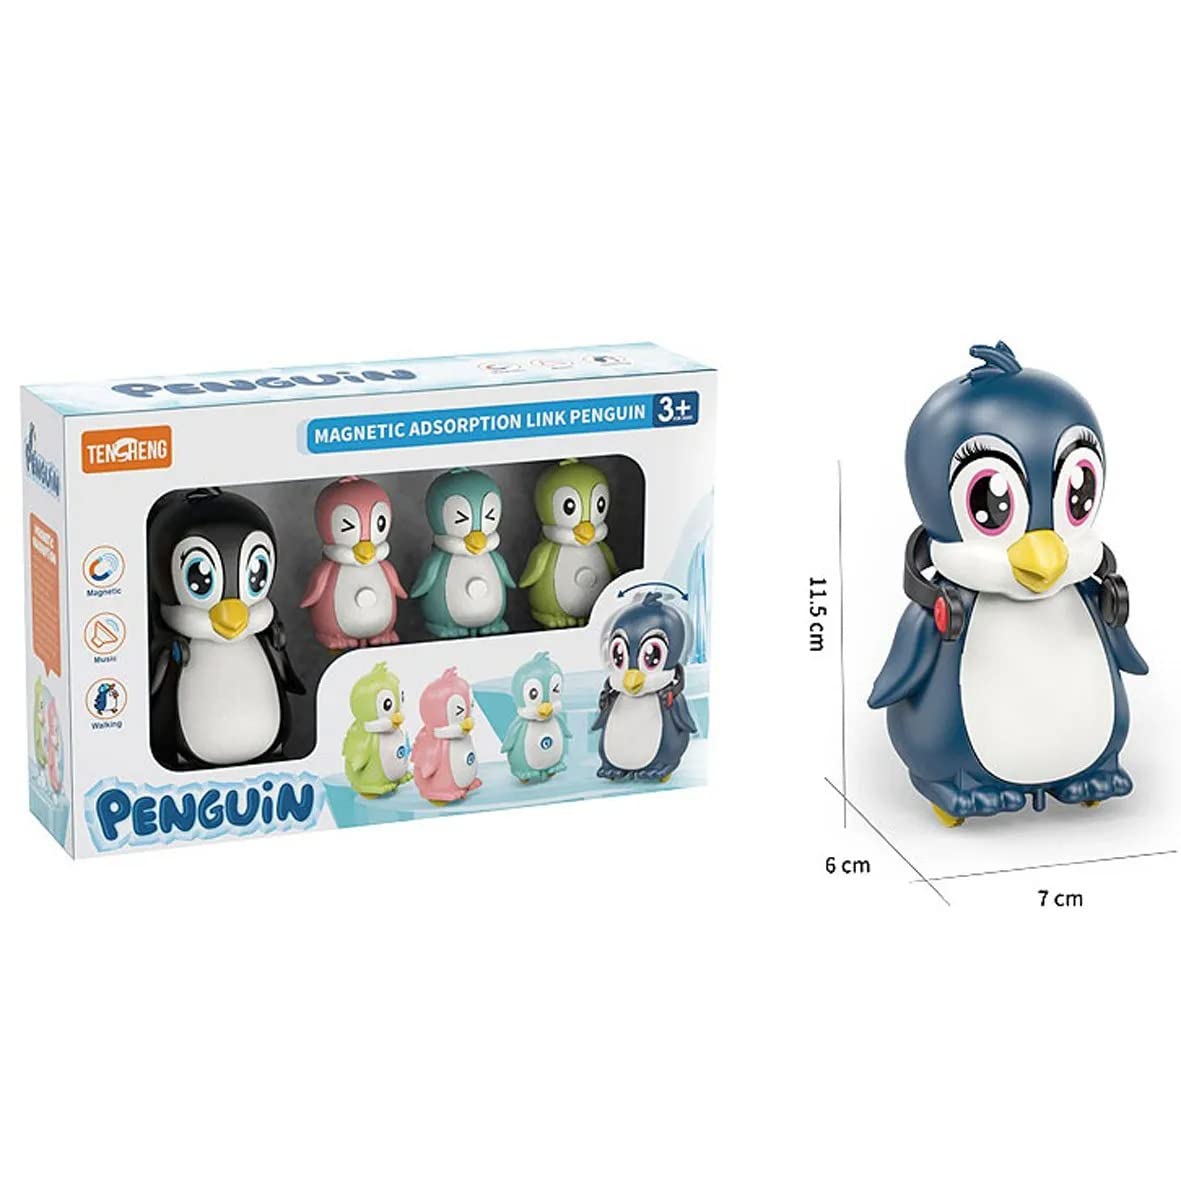 Baby Penguin Musical Train Toy For Kids Infants 6-18 Months 2 Year Old&Up Boys Girls Crawling Toys